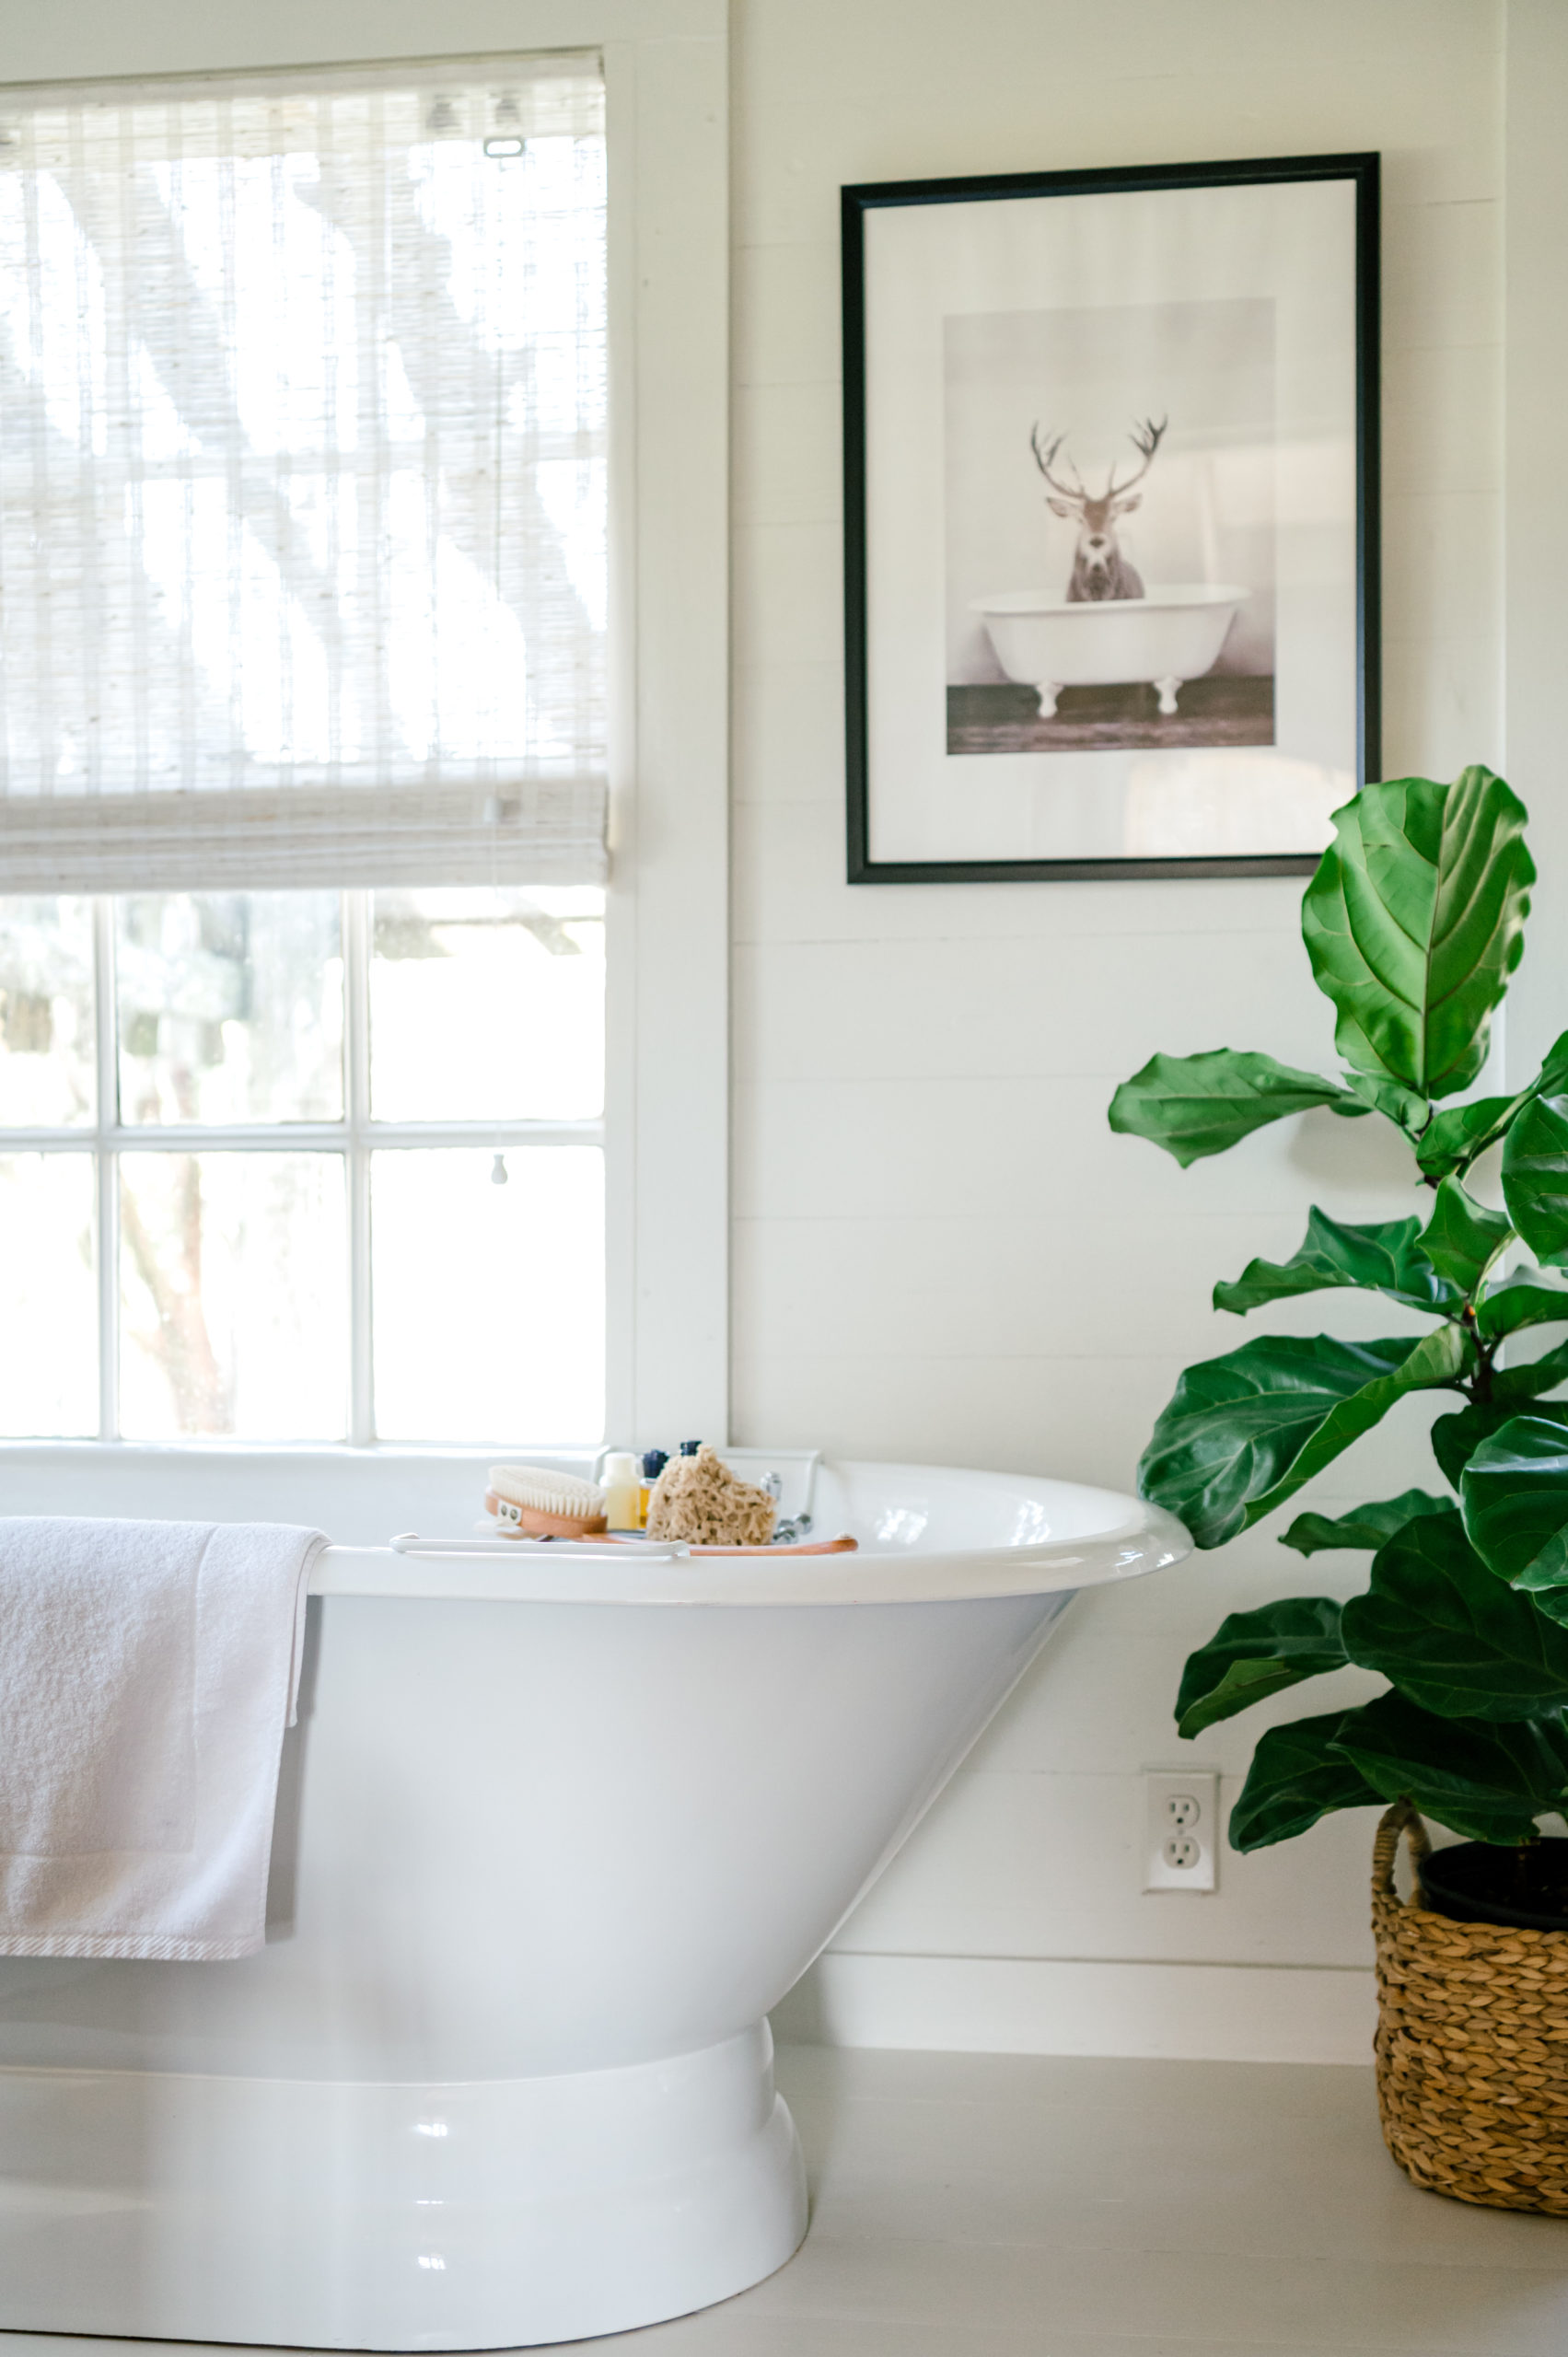 Photo of white Cast Iron Soaking Pedestal Tub and a Fiddle Leaf Fig Tree as well as a black picture frame with a picture of a deer in a bathtub